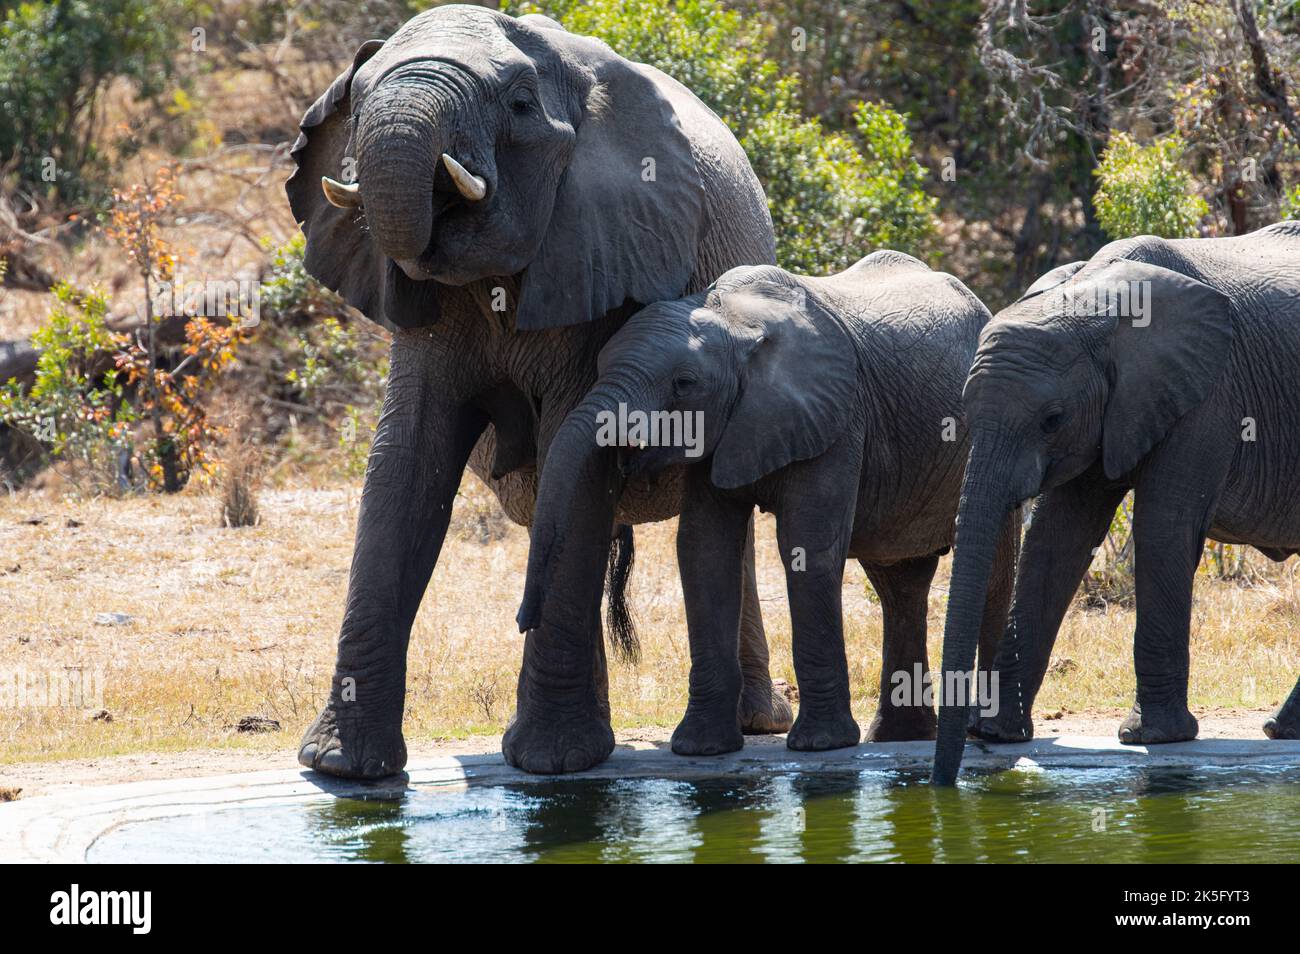 In 1926 the national park had just 6 elephants left. Then park warden Steven-Hamilton bought a herd of elephants in Mozambique and 20 years later the Stock Photo